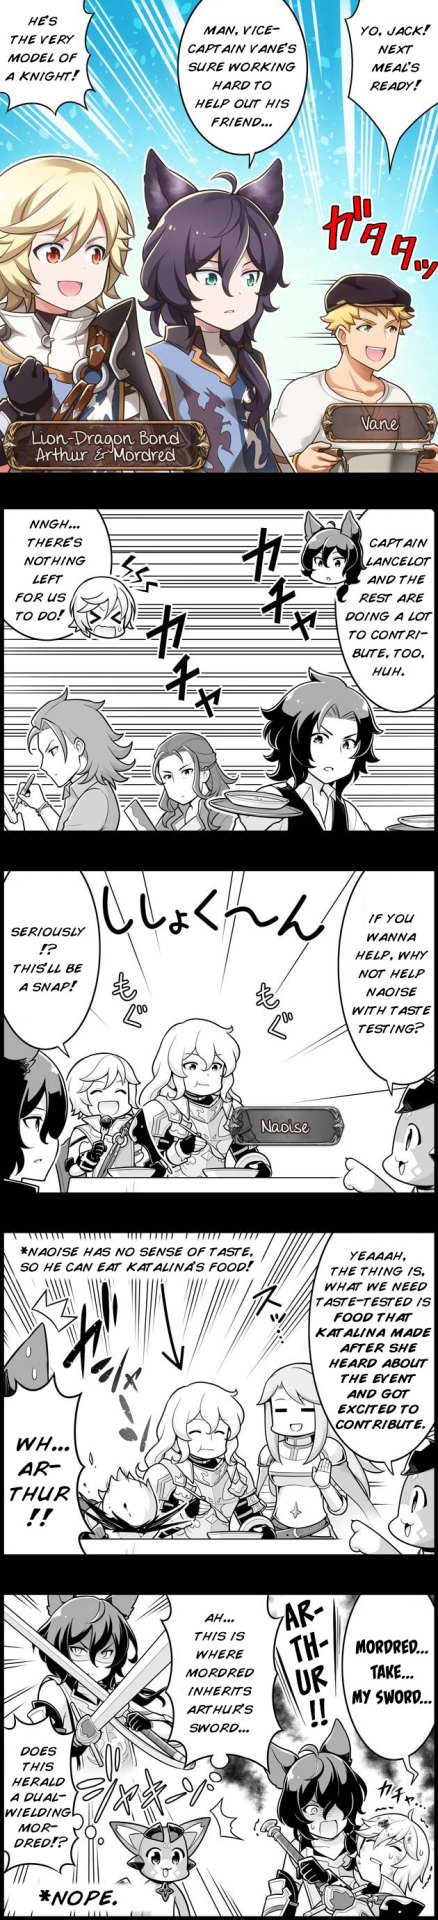 Grand Blues! Ch. 1170 Knights and Cuisine